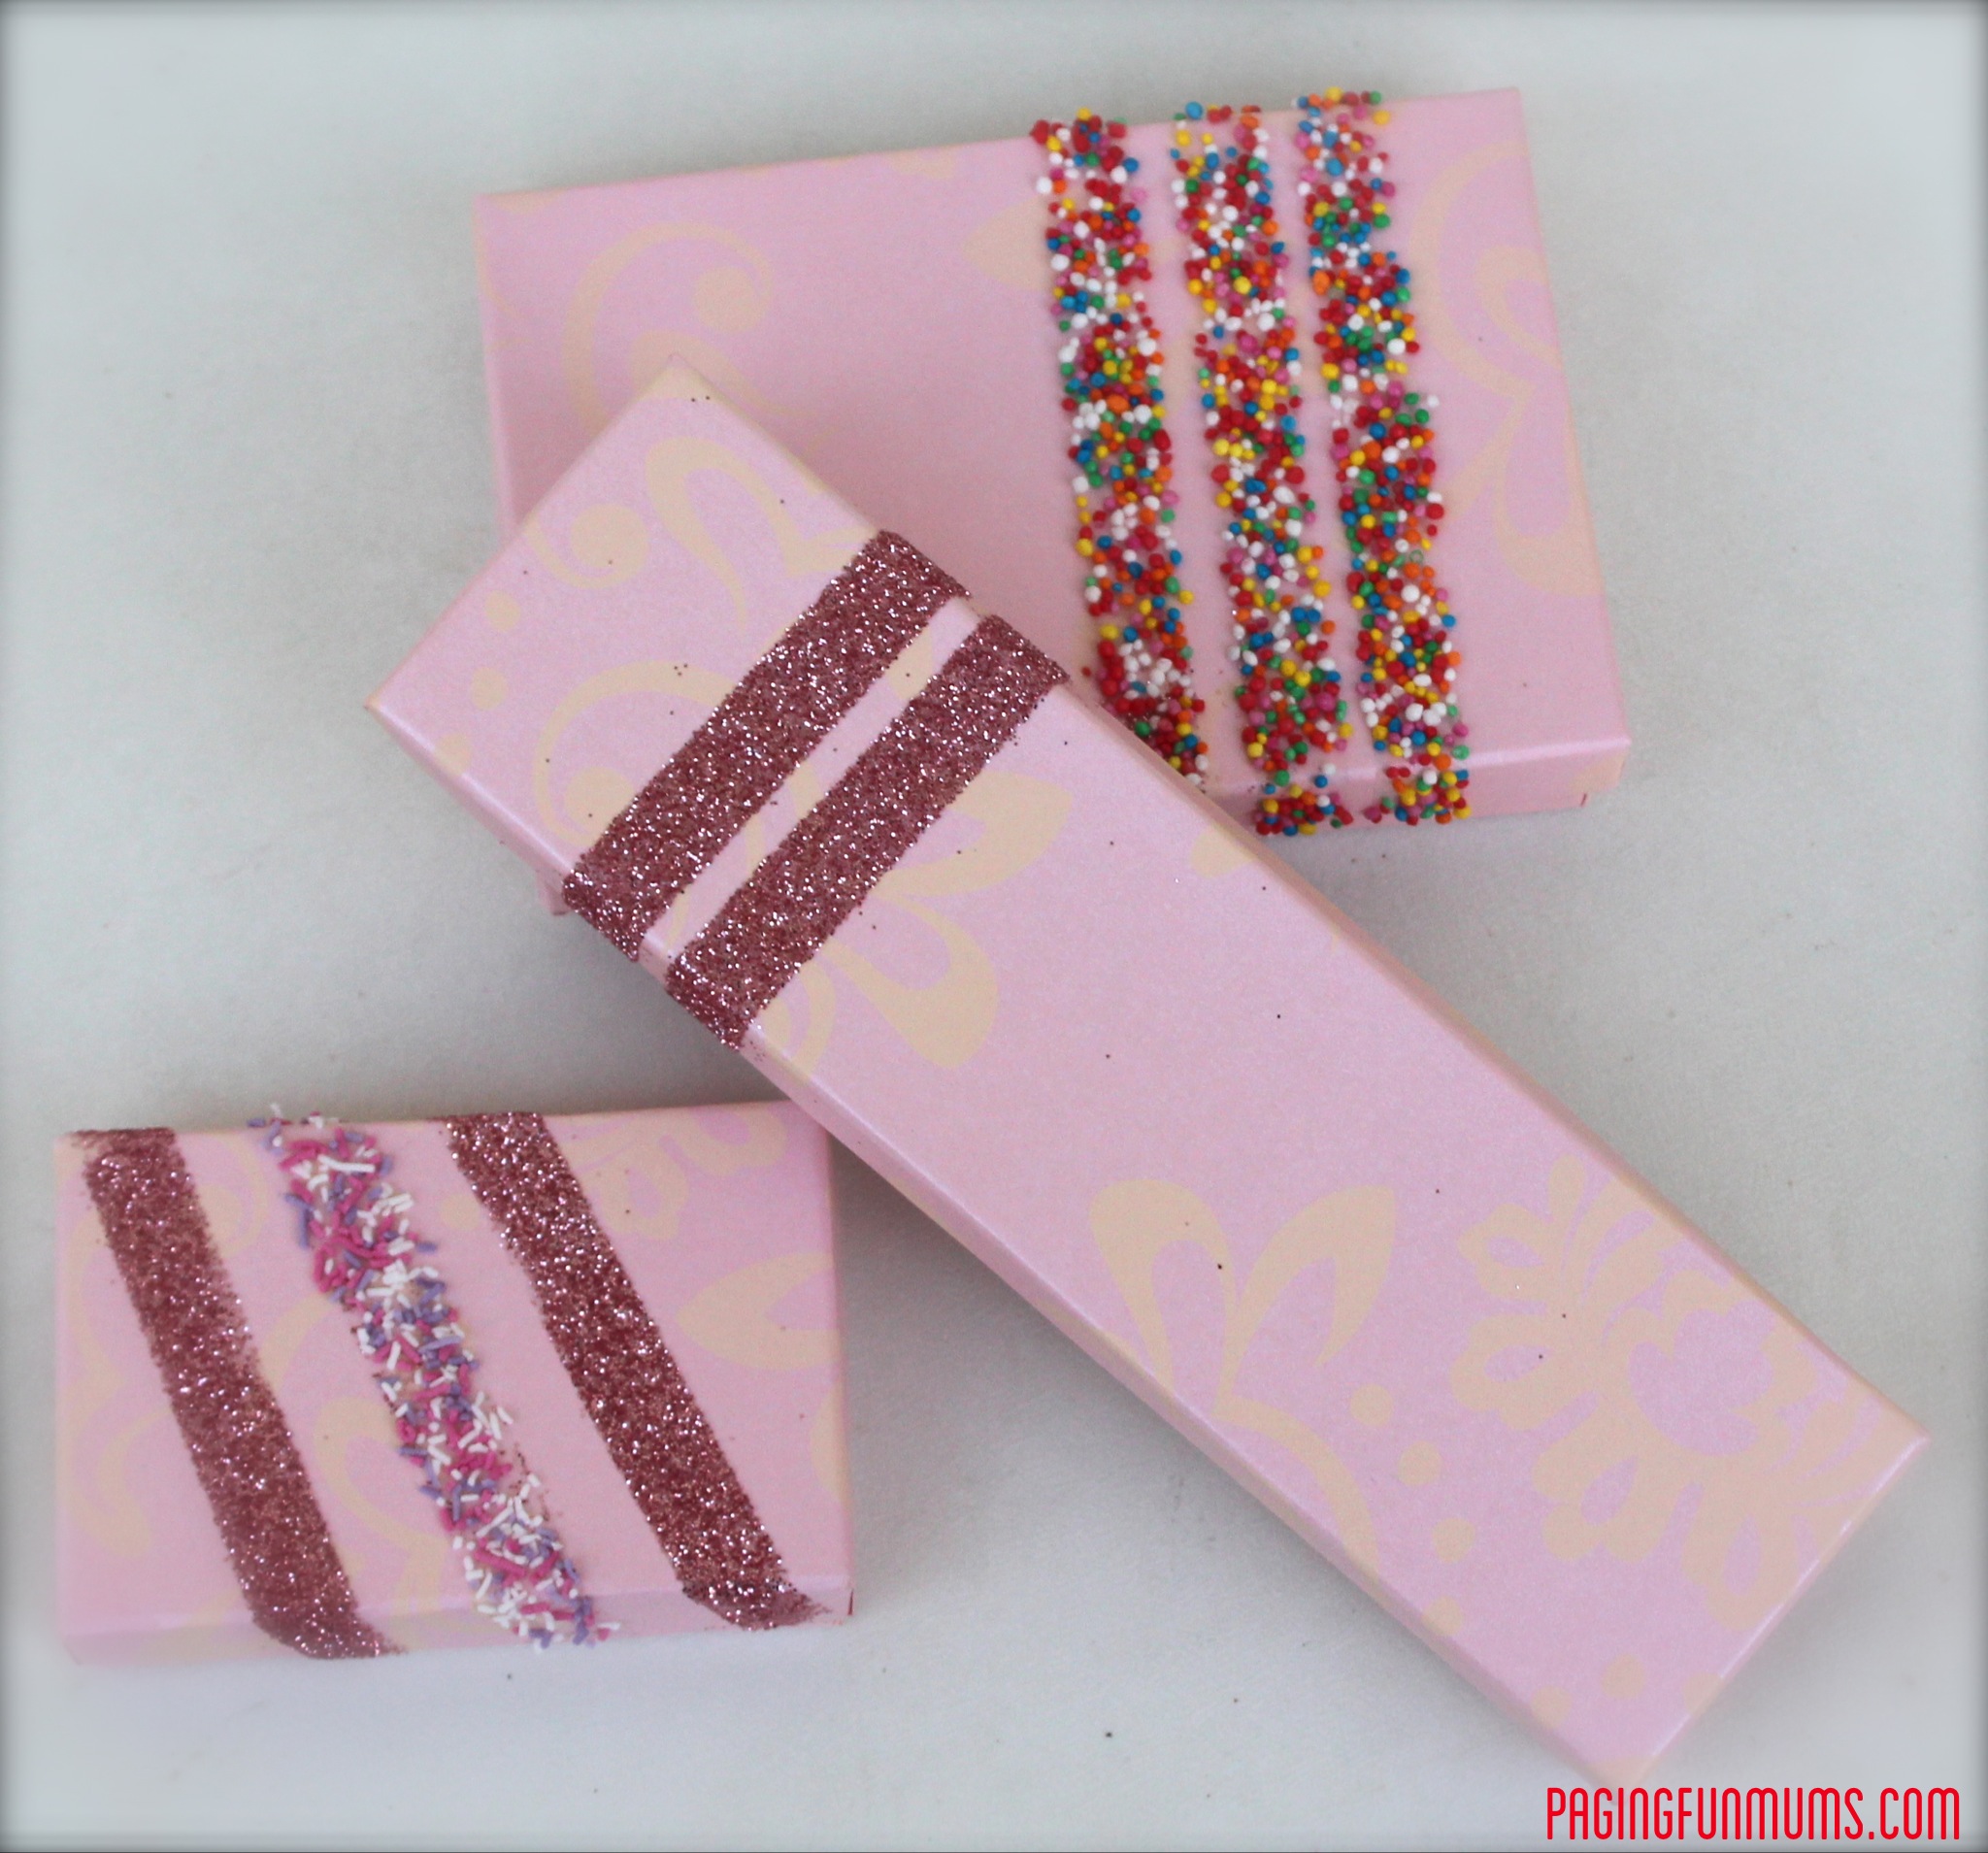 Glitter & Sprinkles + Double Sided Tape = FUN Gift Wrapping Idea!